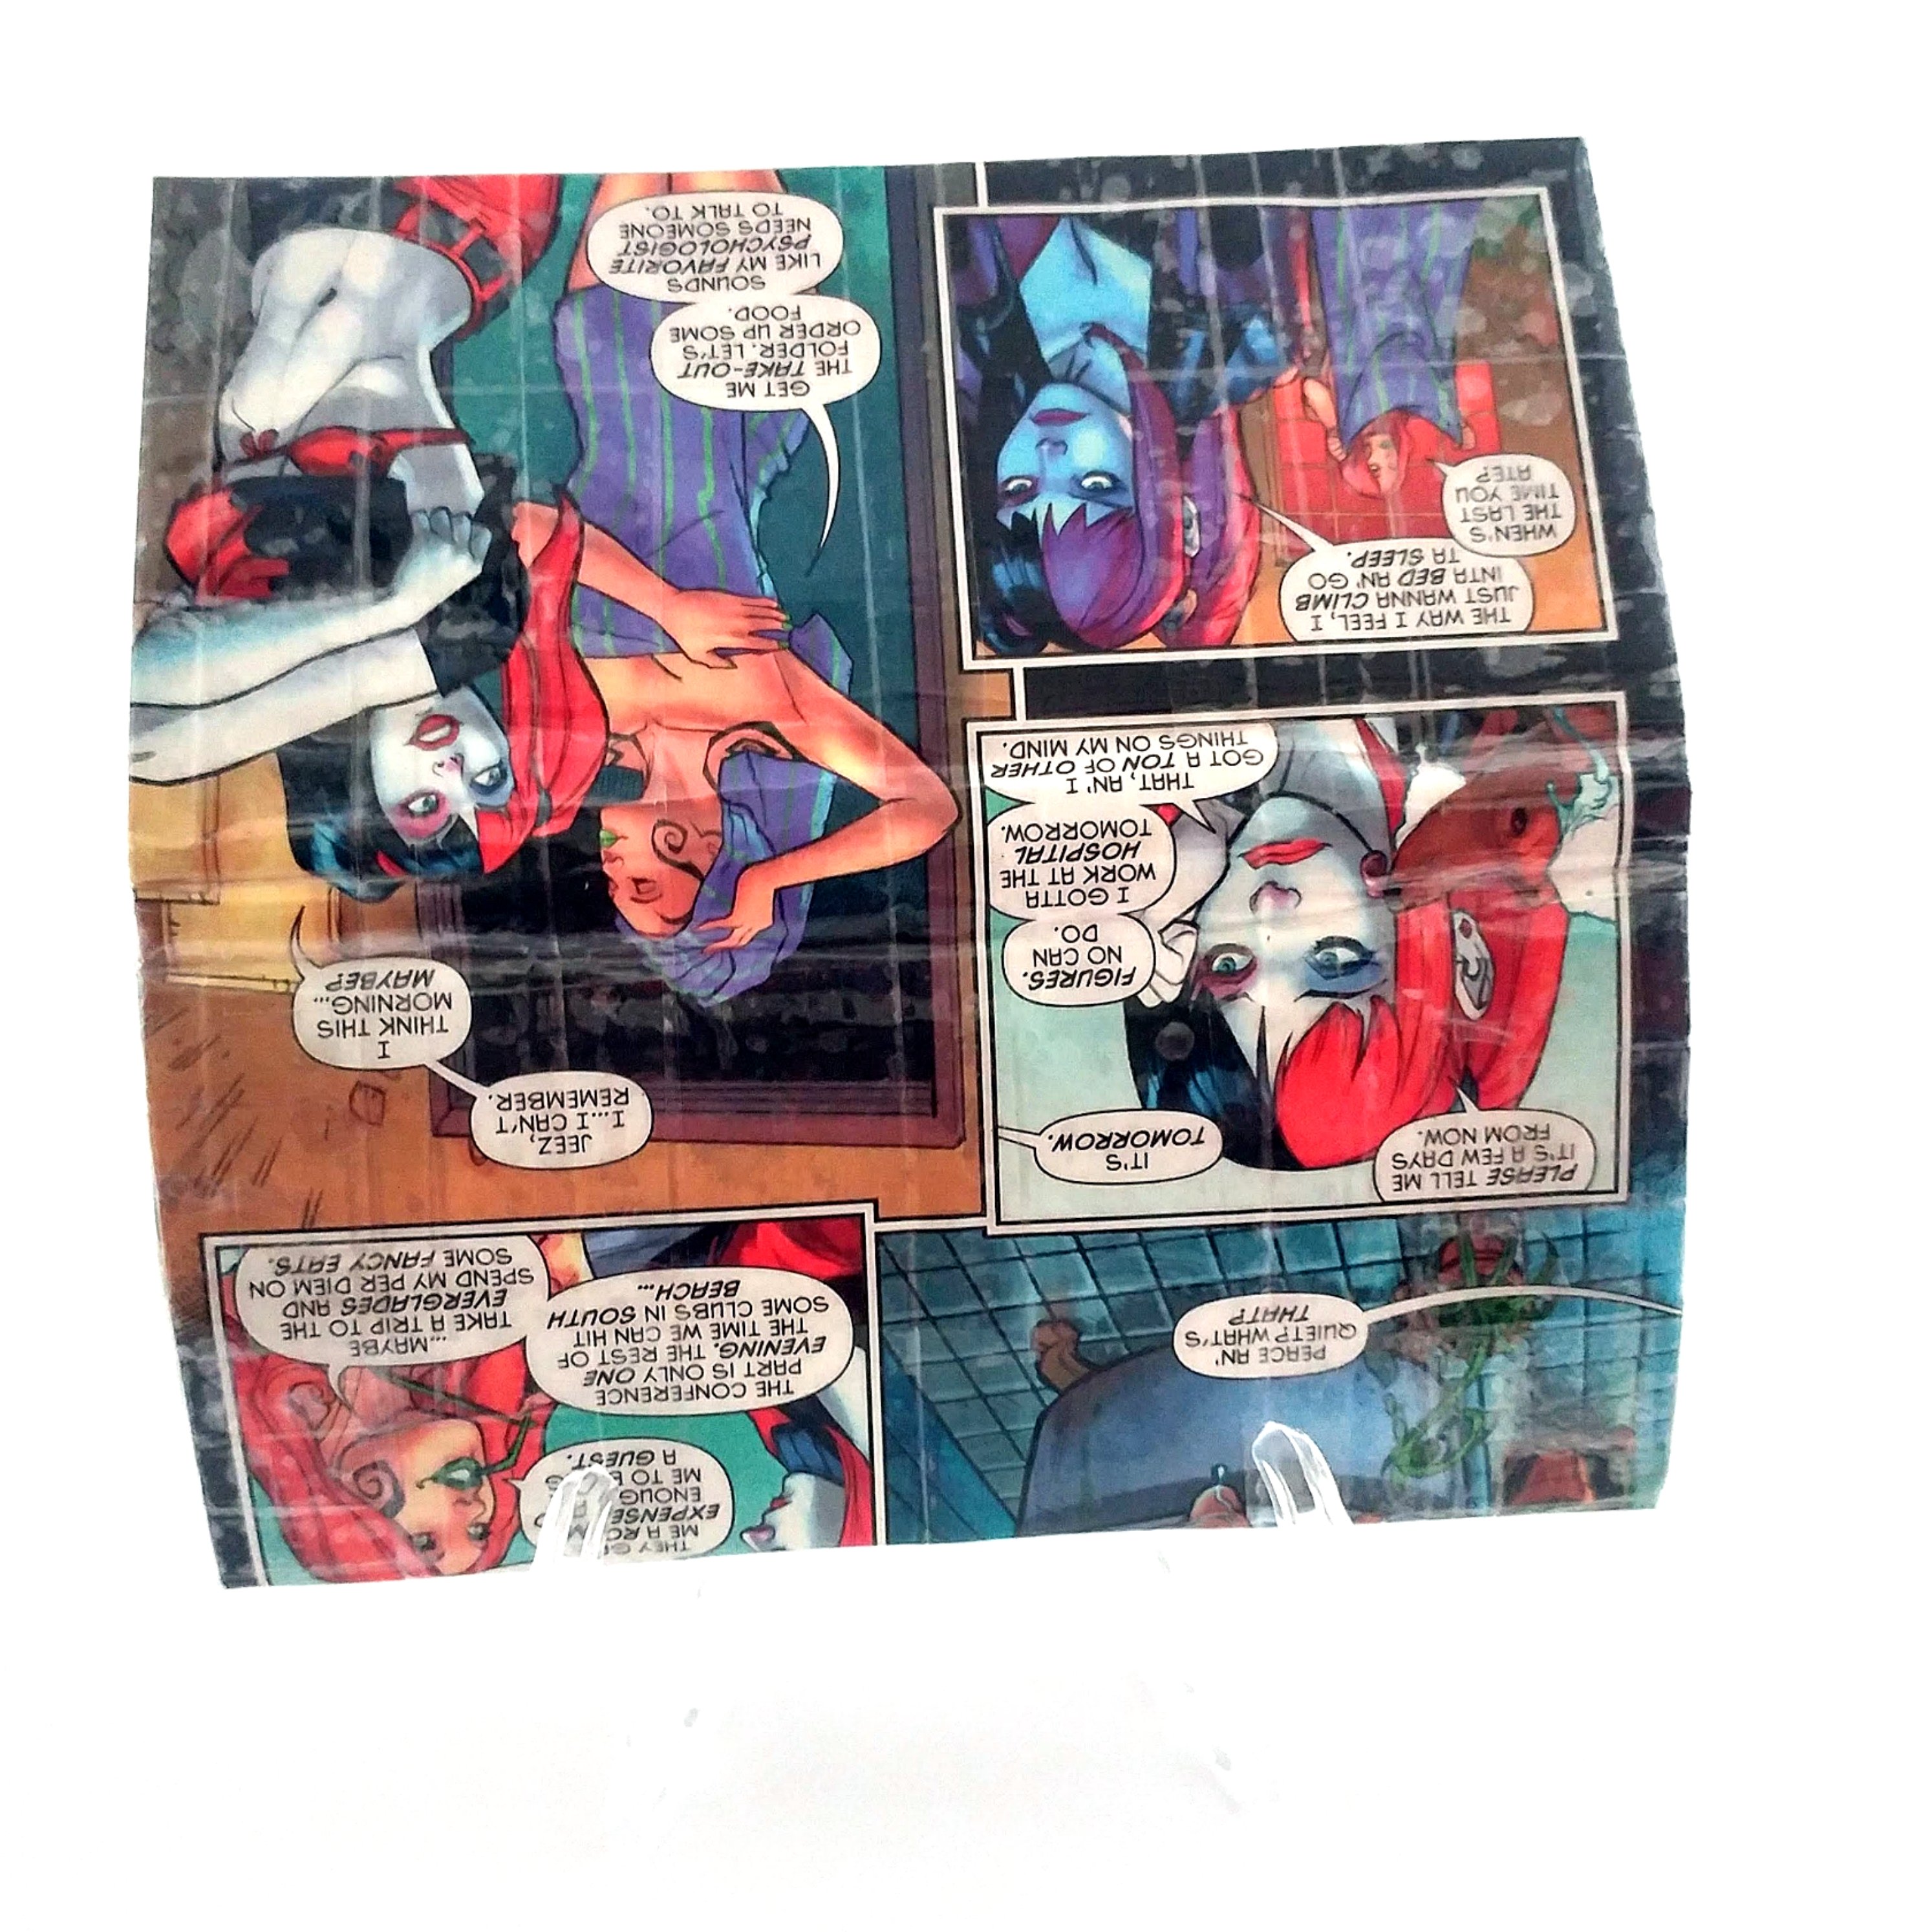 Showing Harley Quinn and best friend Poison Ivy showering on a handmade wallet create from an upcycled Harley Quinn comic book.